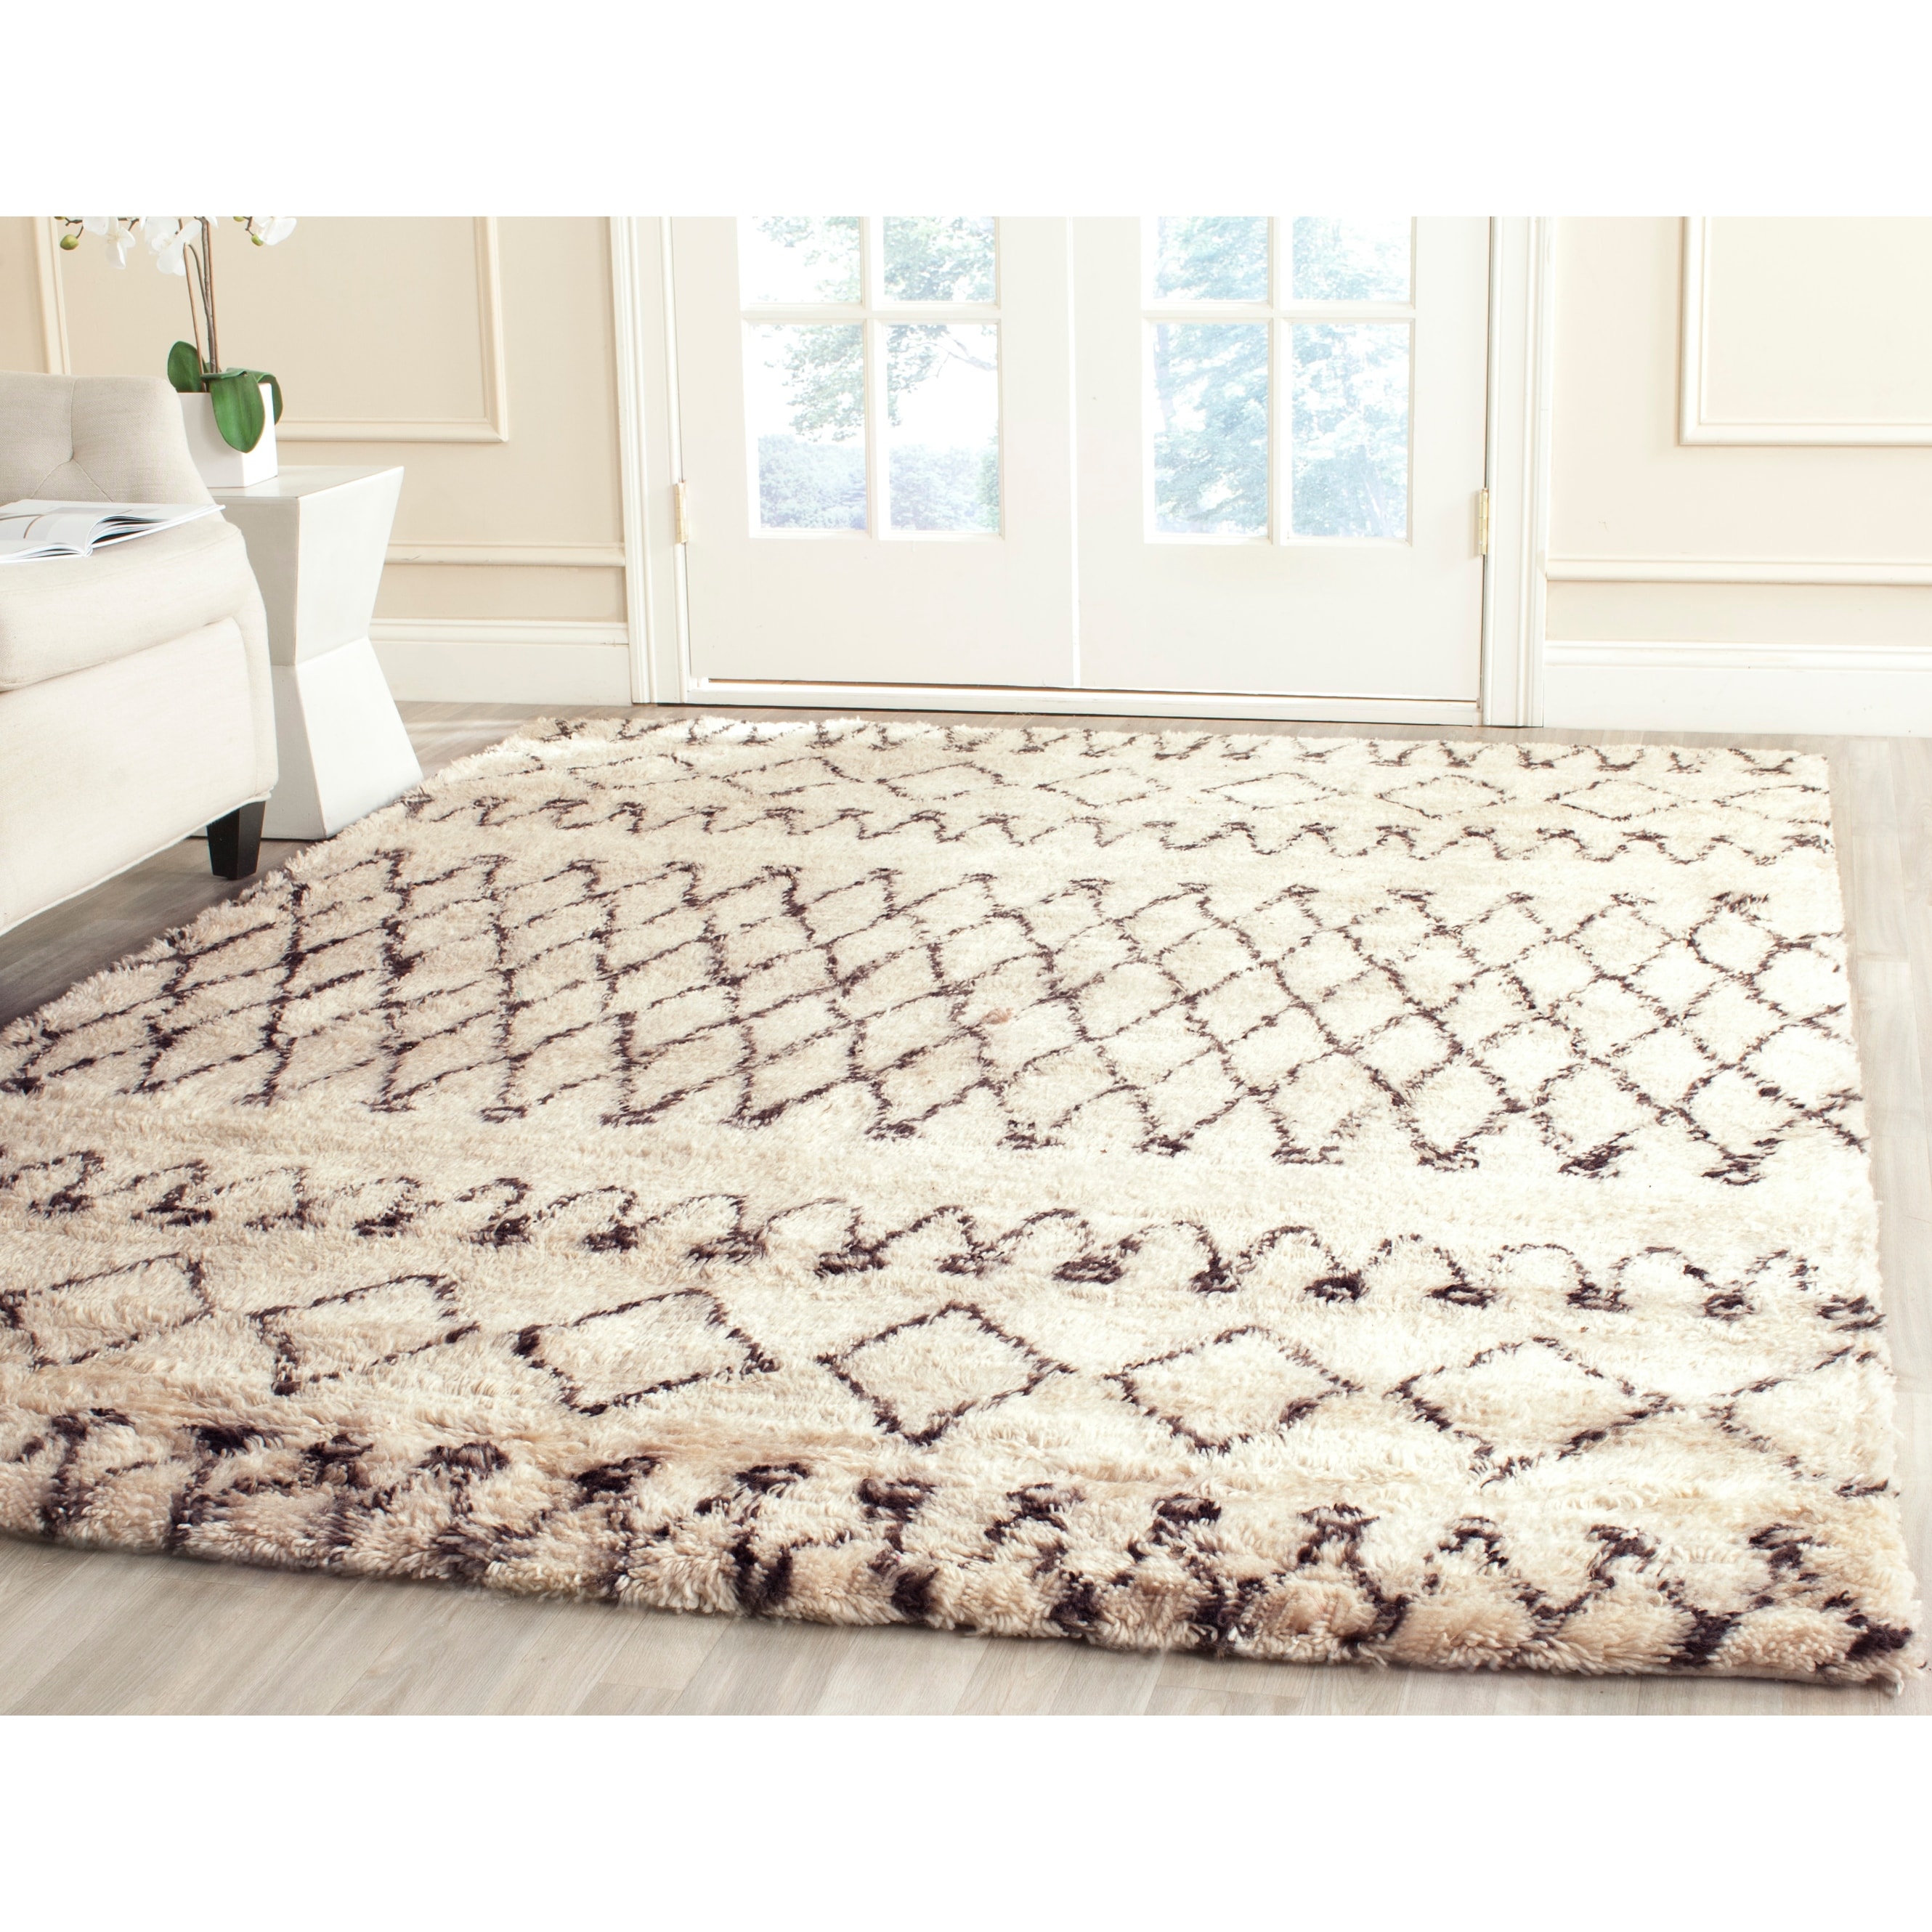 Safavieh Casablanca Collection CSB975A Handmade Moroccan Wool Area Rug 8' x 10' Ivory/Brown 